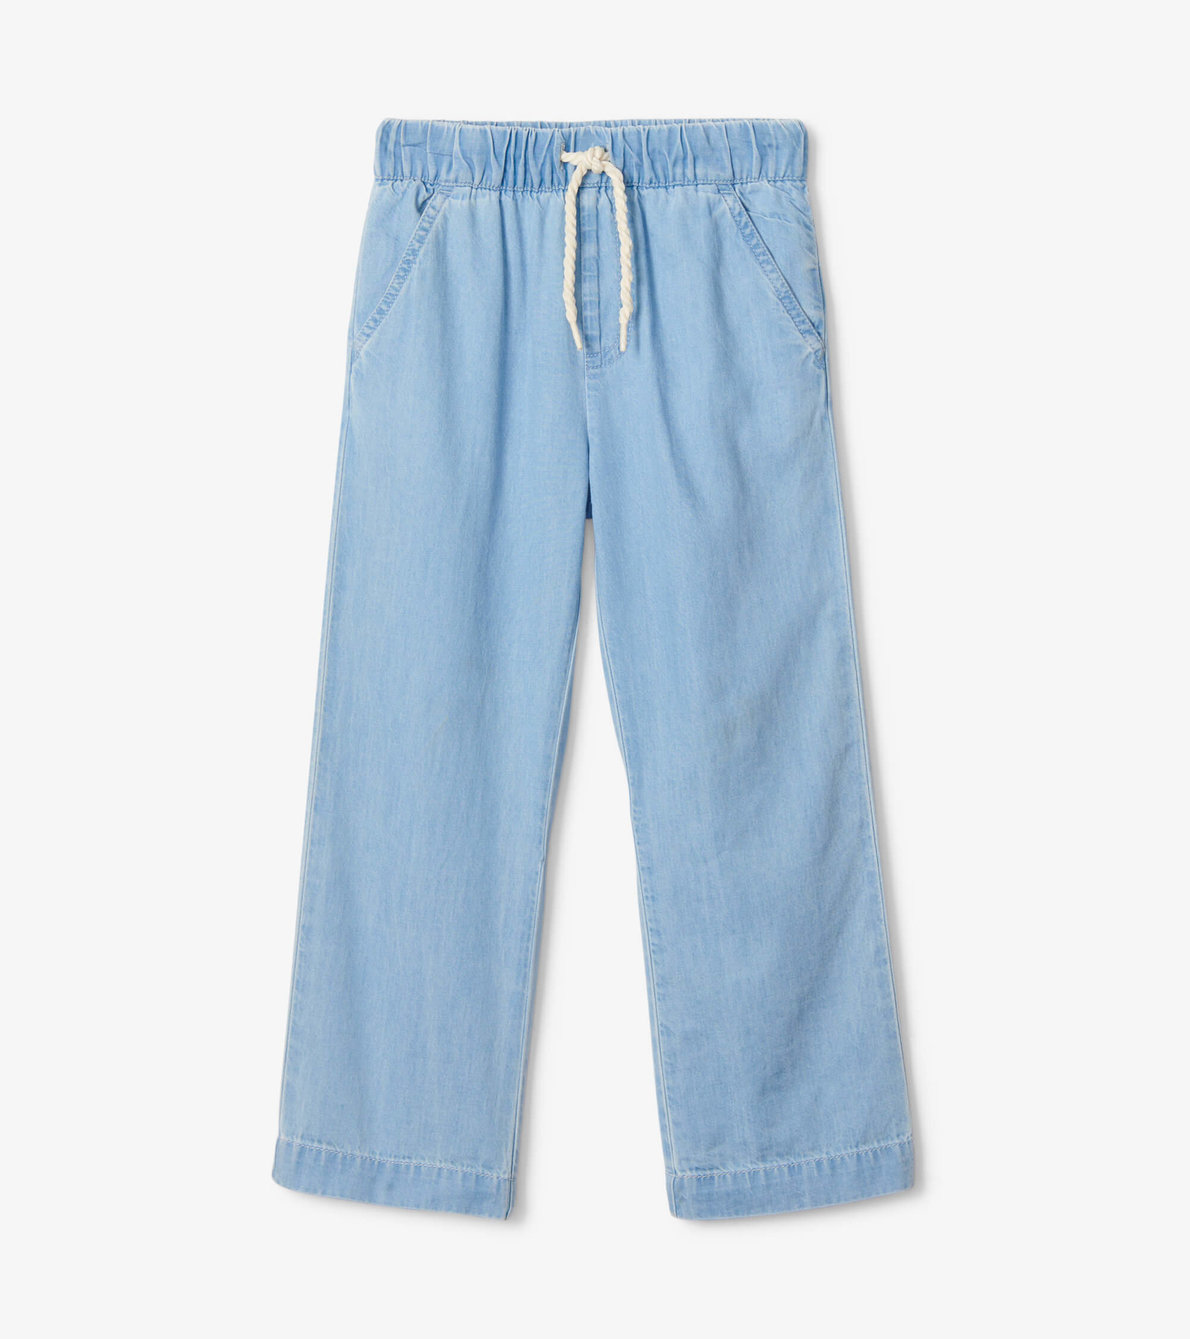 View larger image of Chambray Relaxed Fit Pants